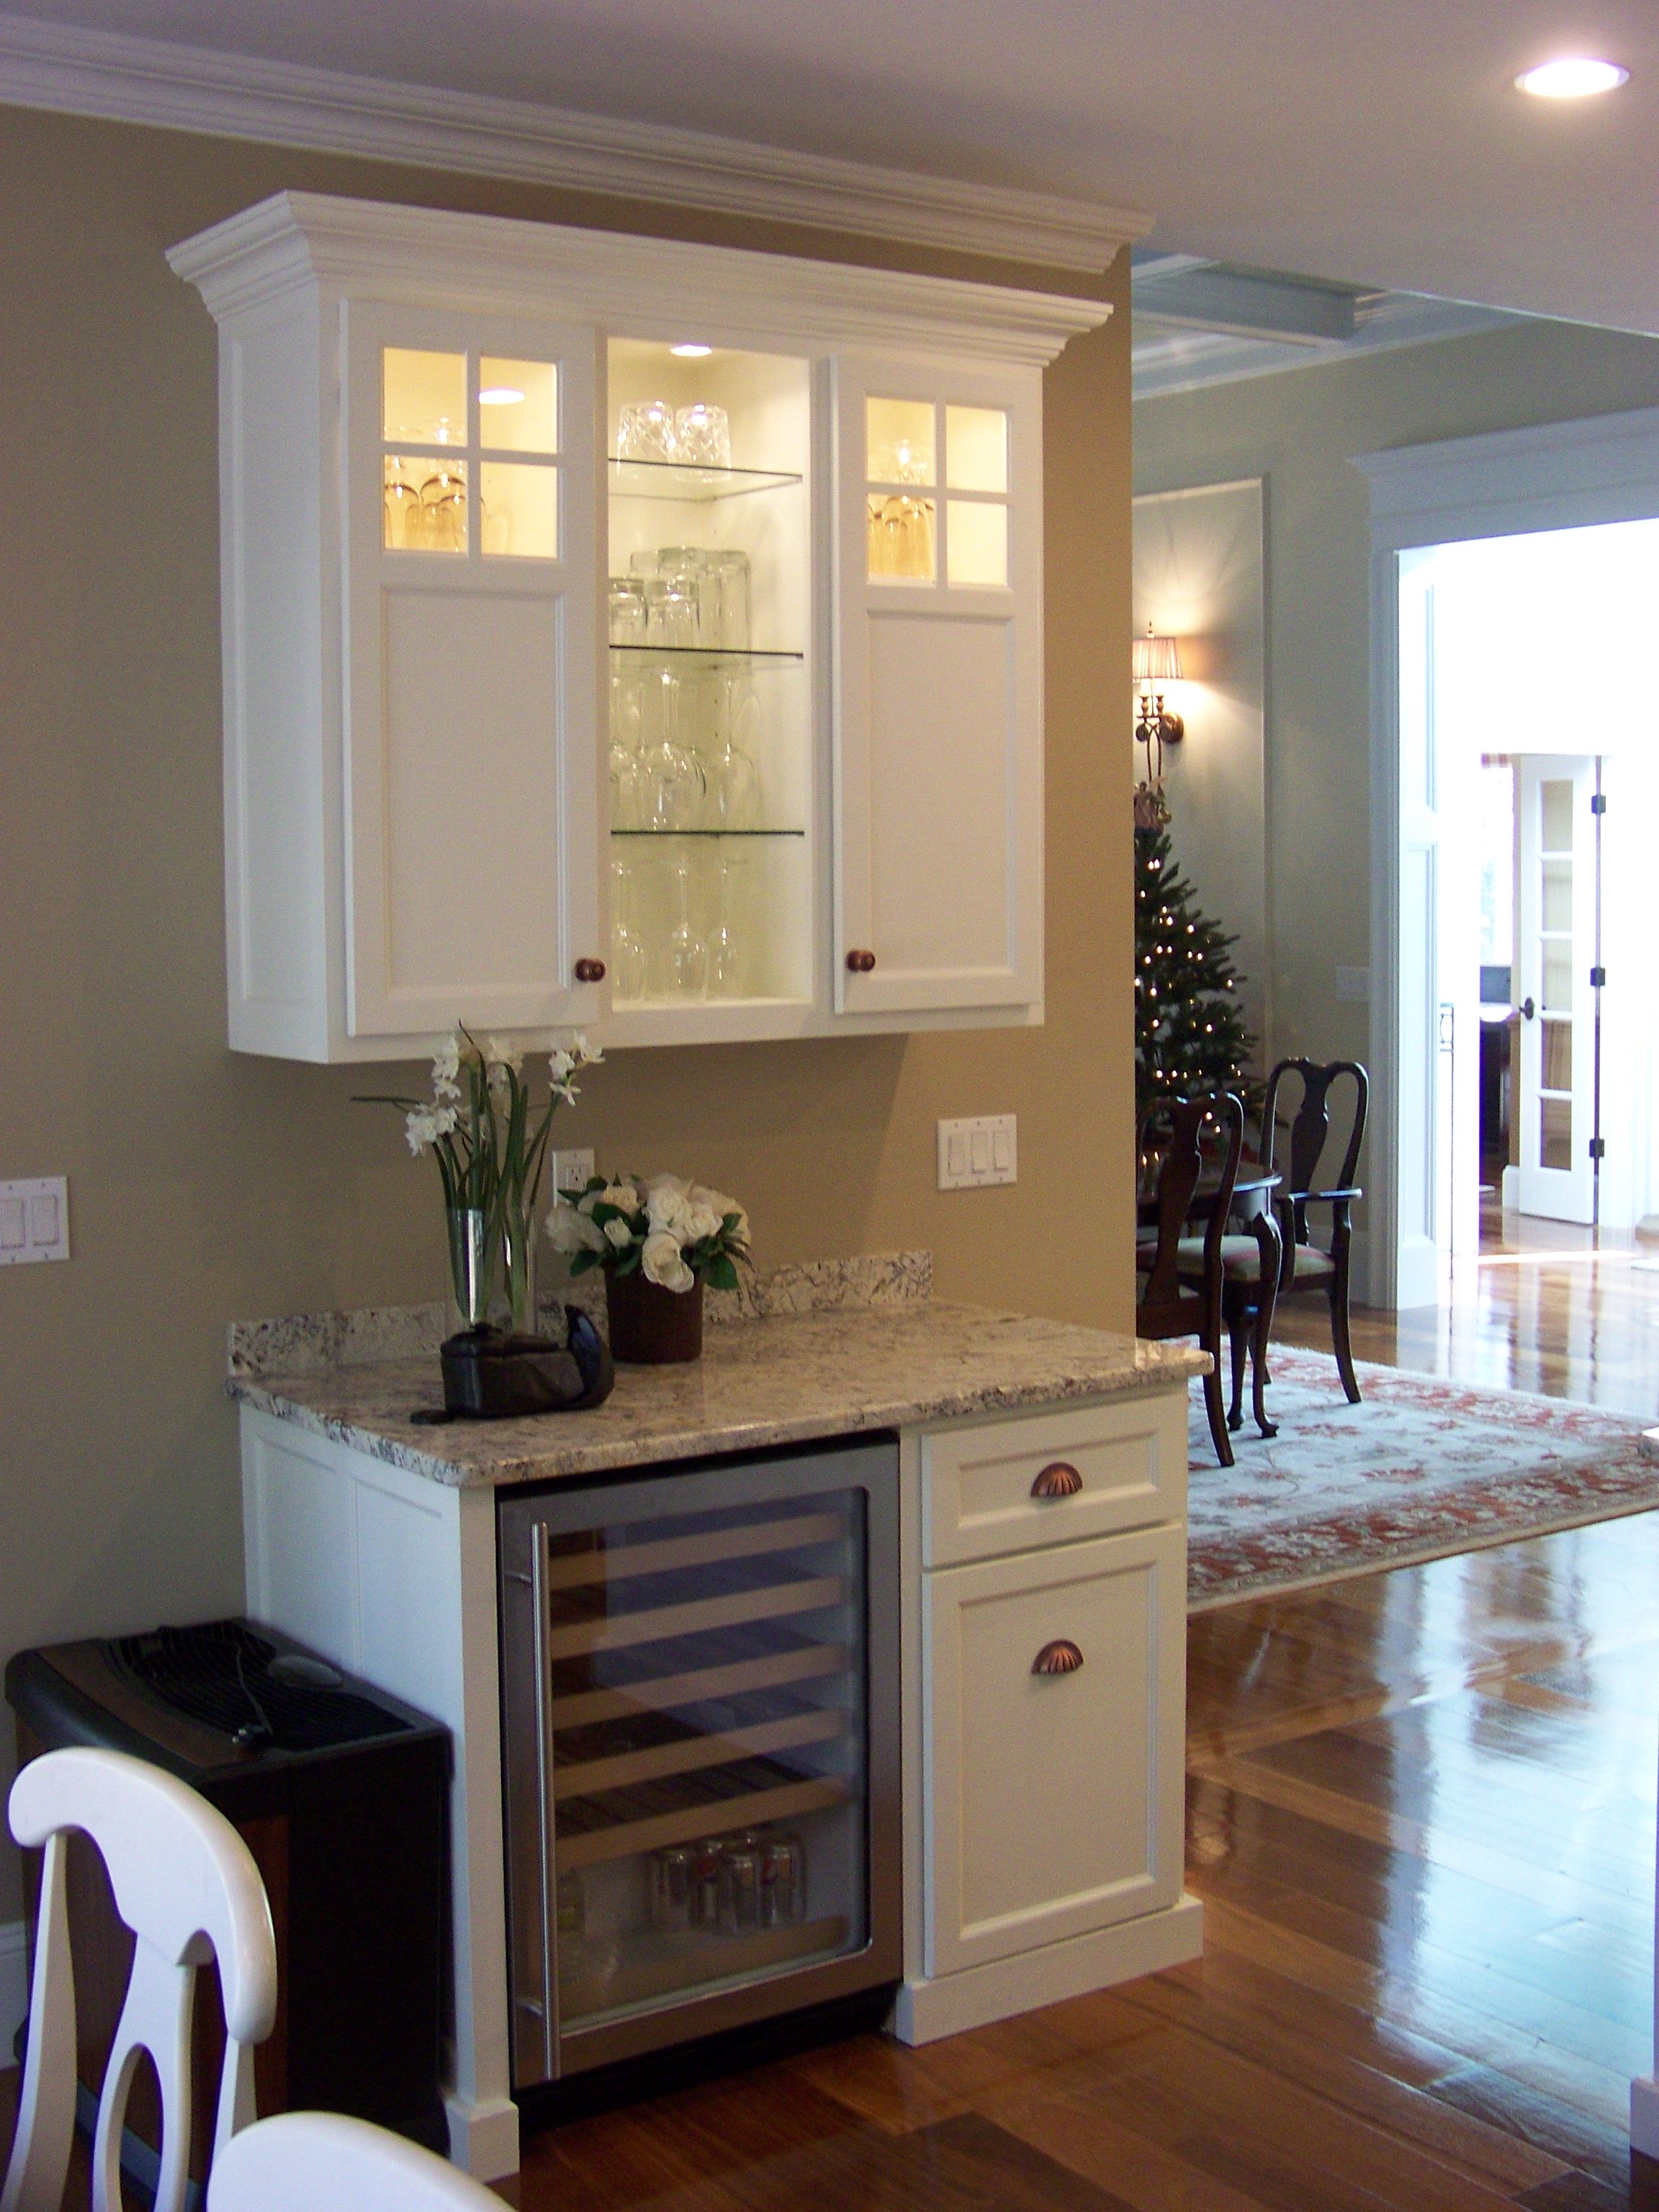 Kitchen Design Ideas: A Beverage Station using a Wine Cooler in a Tall